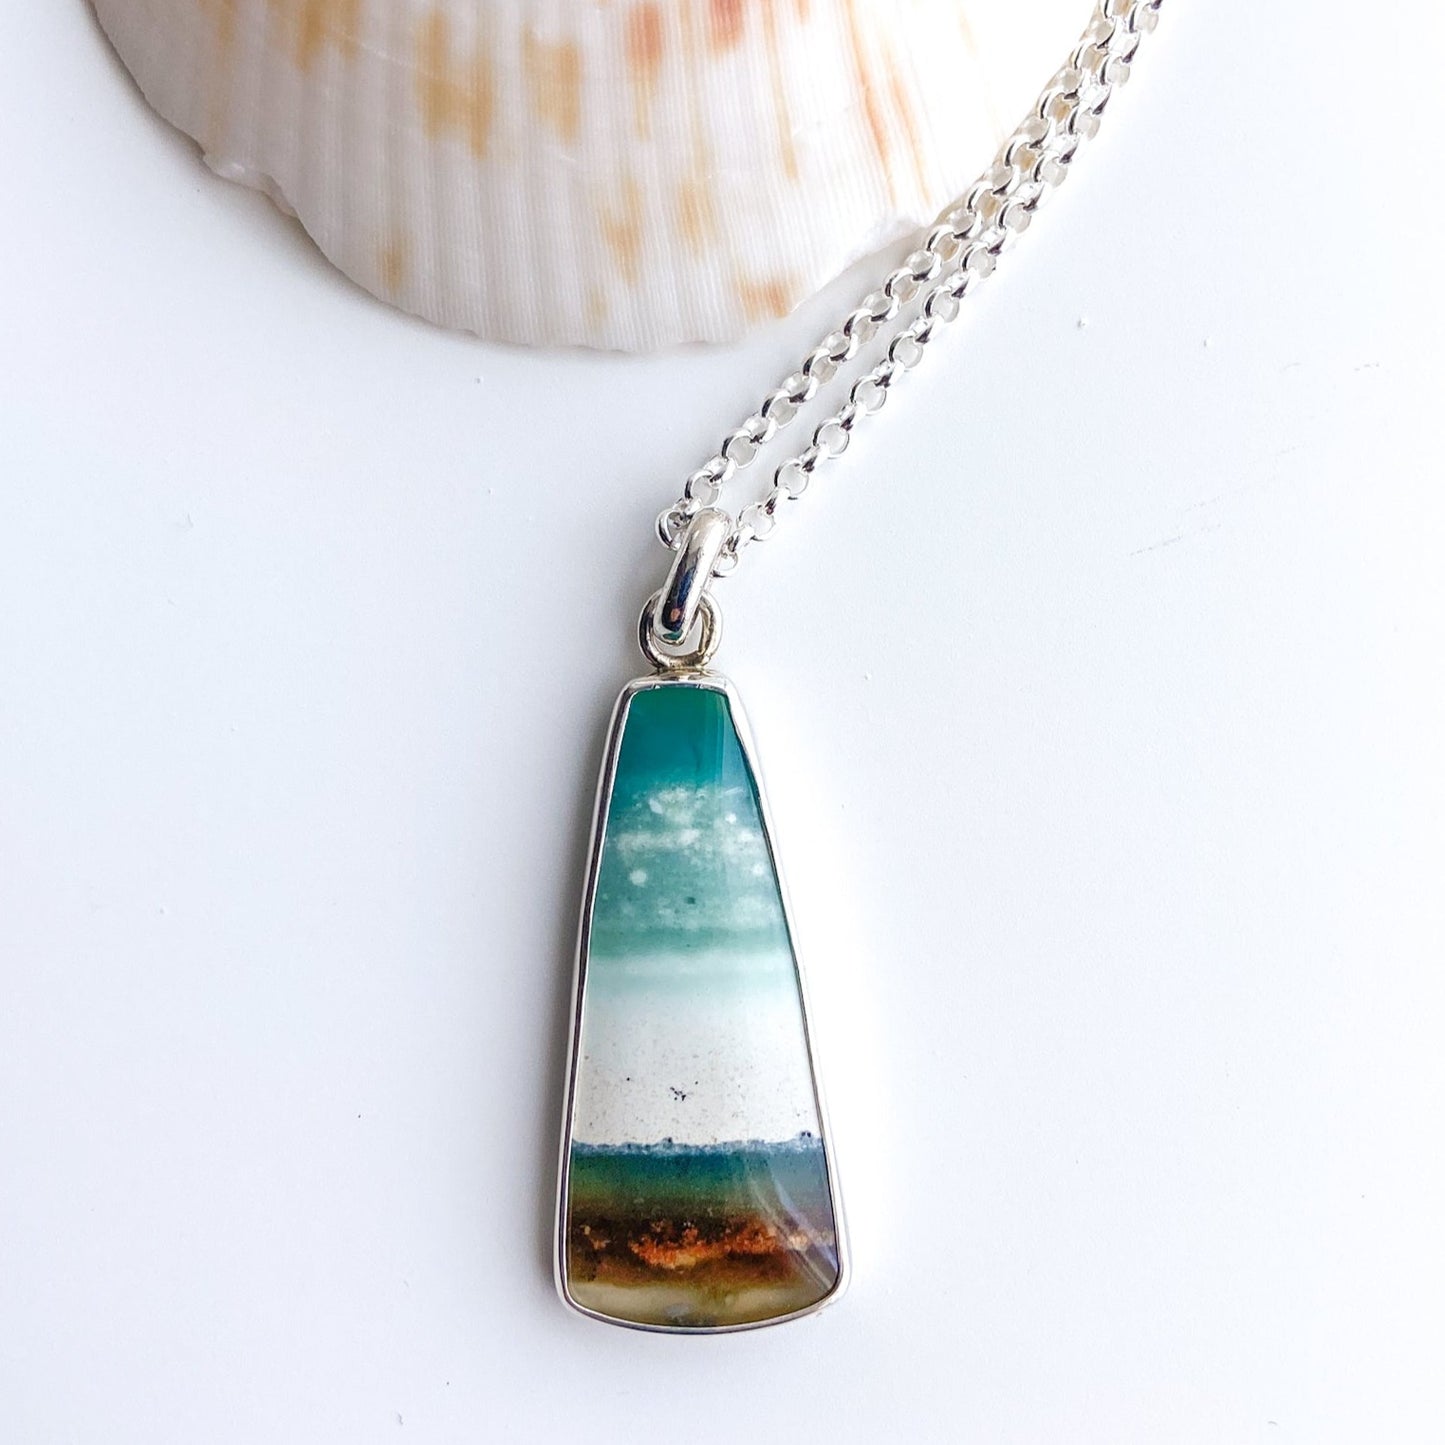 An opalized wood gemstone and silver pendant shows a beach scene in shades of aqua, teal, cream and brown. It is displayed with a scallop shell.